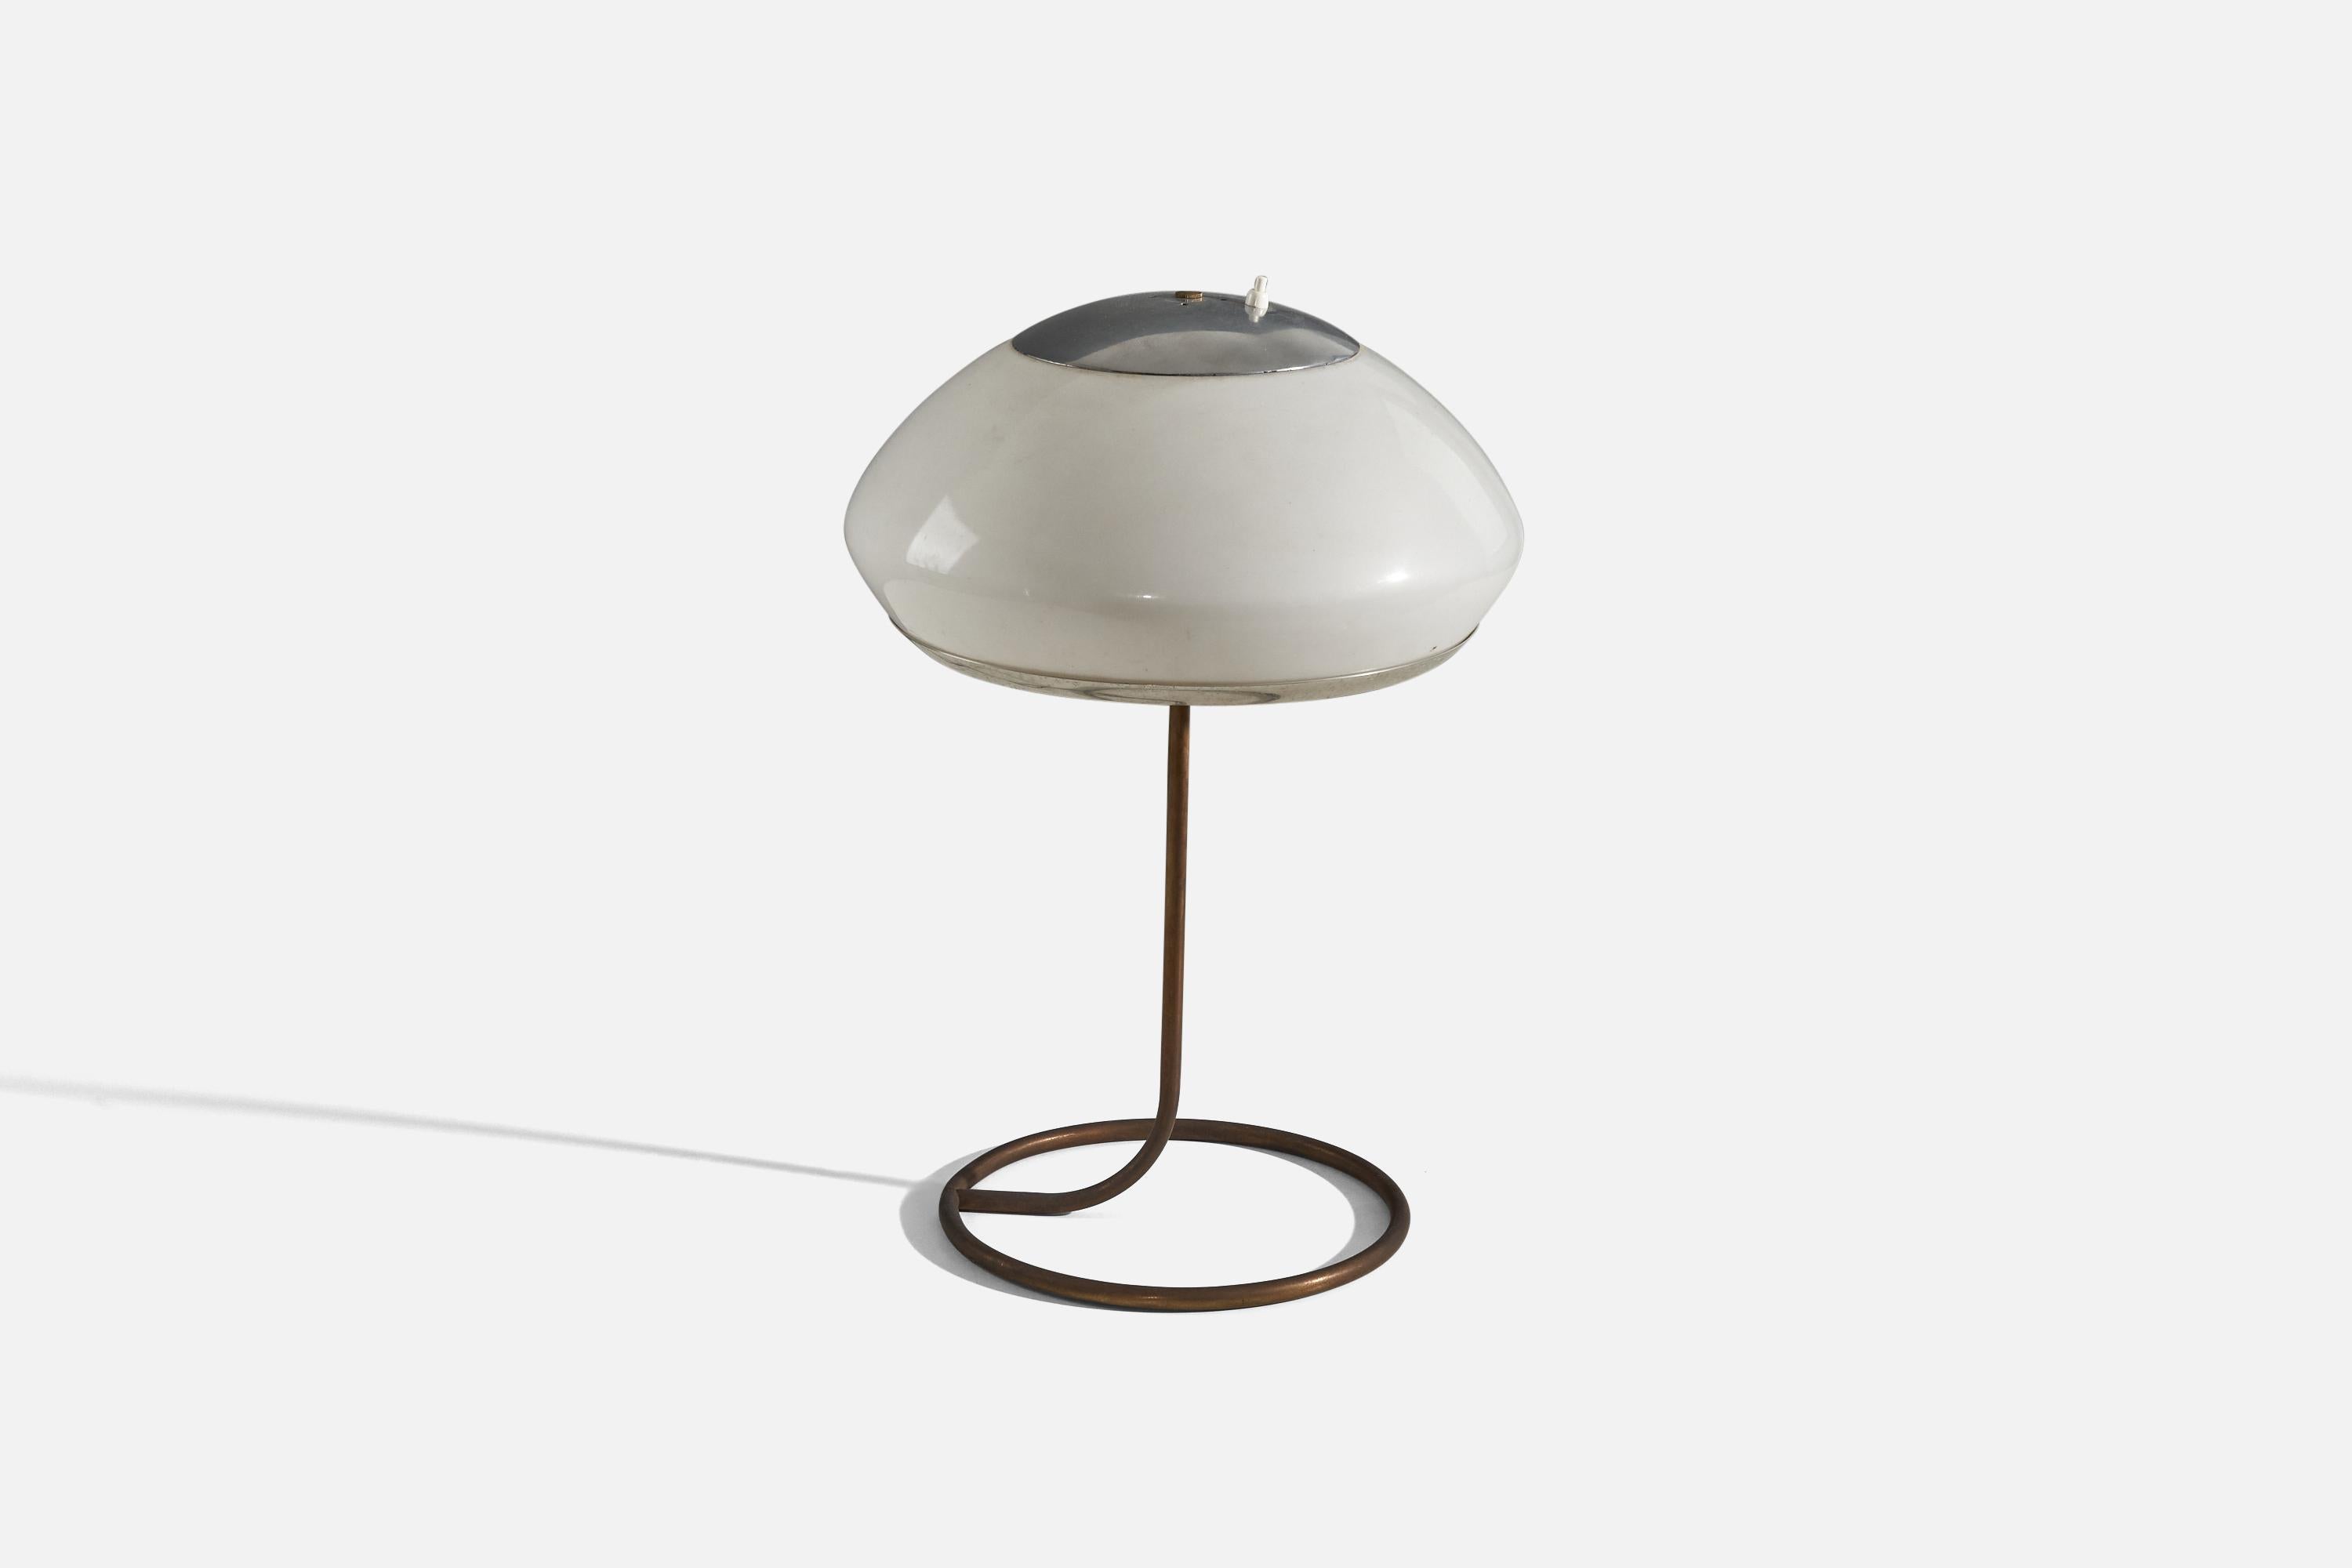 A metal and acrylic table lamp designed and produced in Italy, 1960s.

